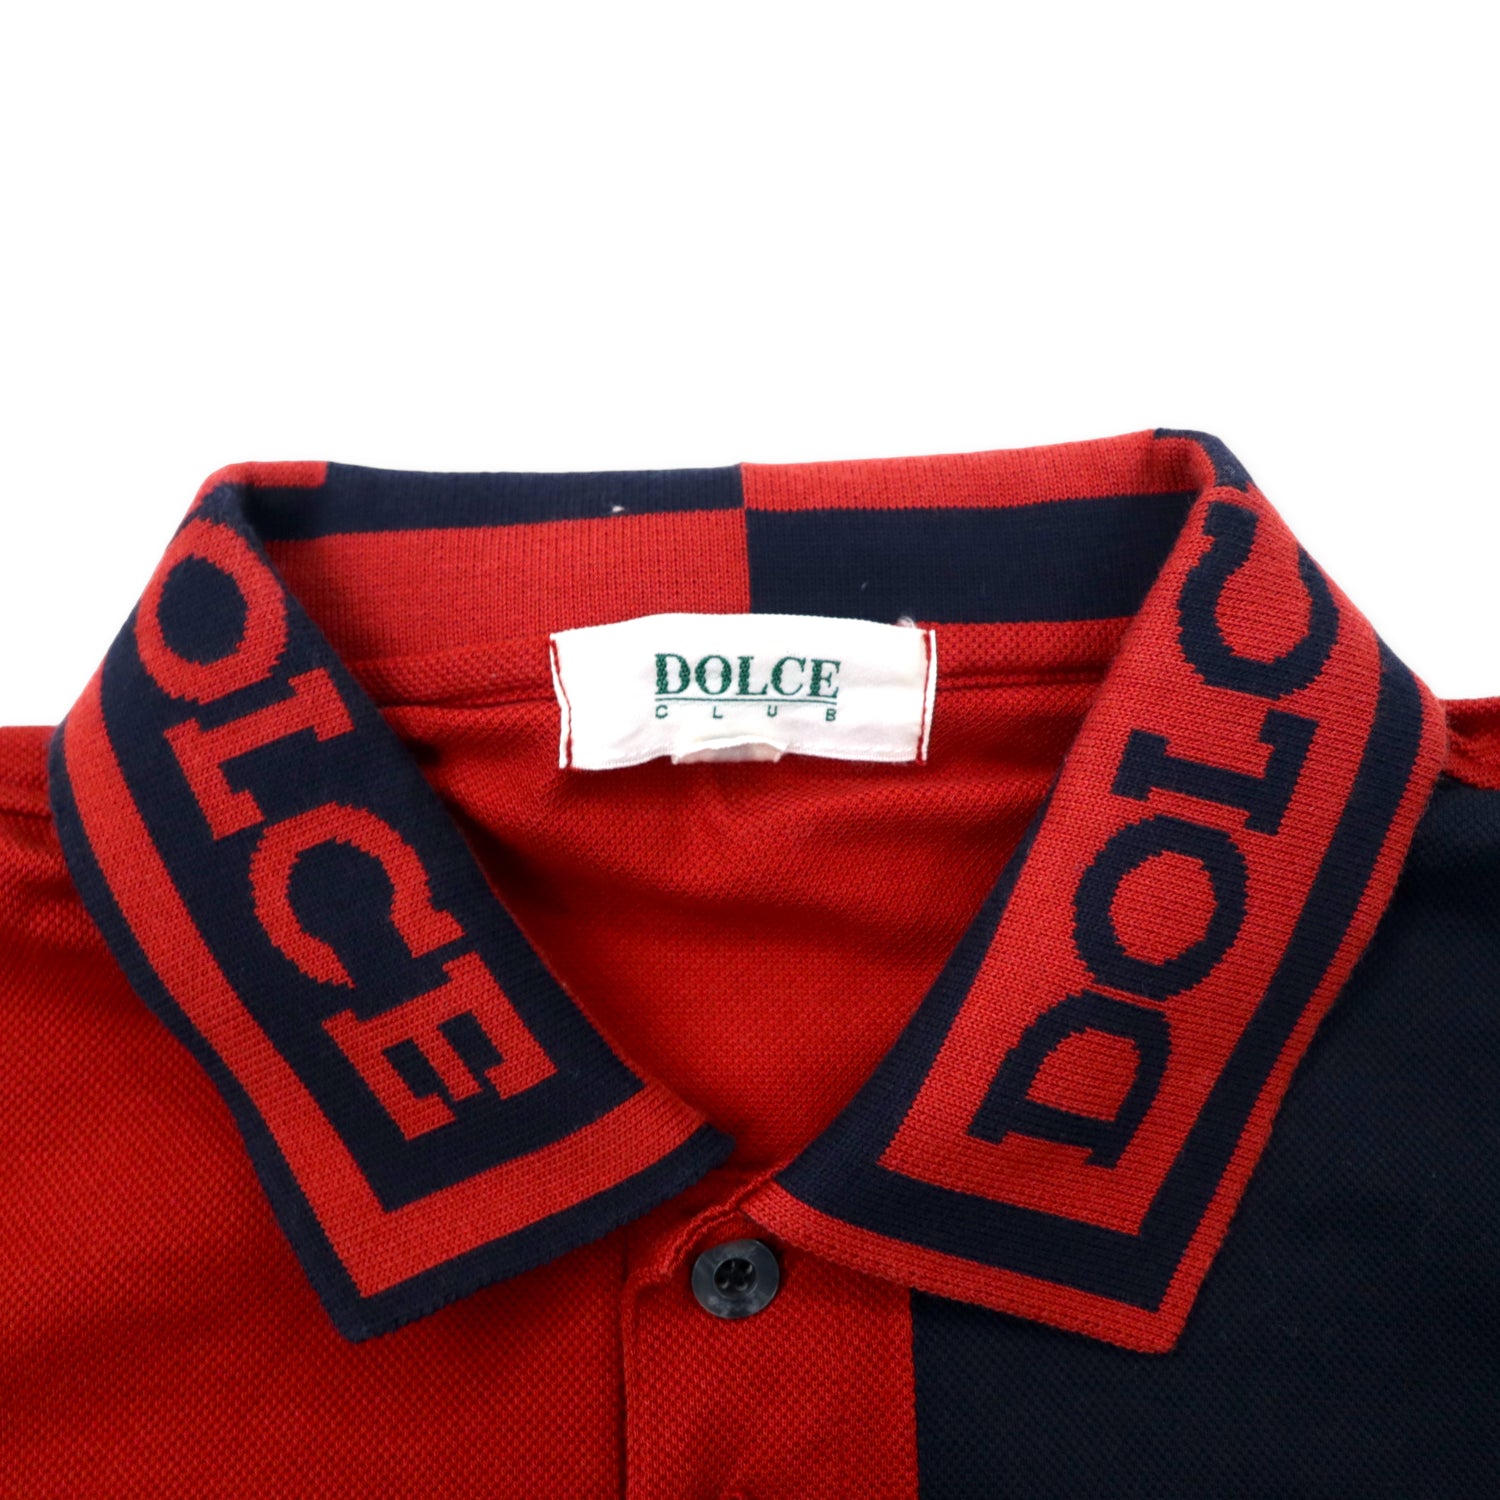 DOLCE CLUB 90s Polo Shirt 50 Red Navy Cotton Dog Character Japan